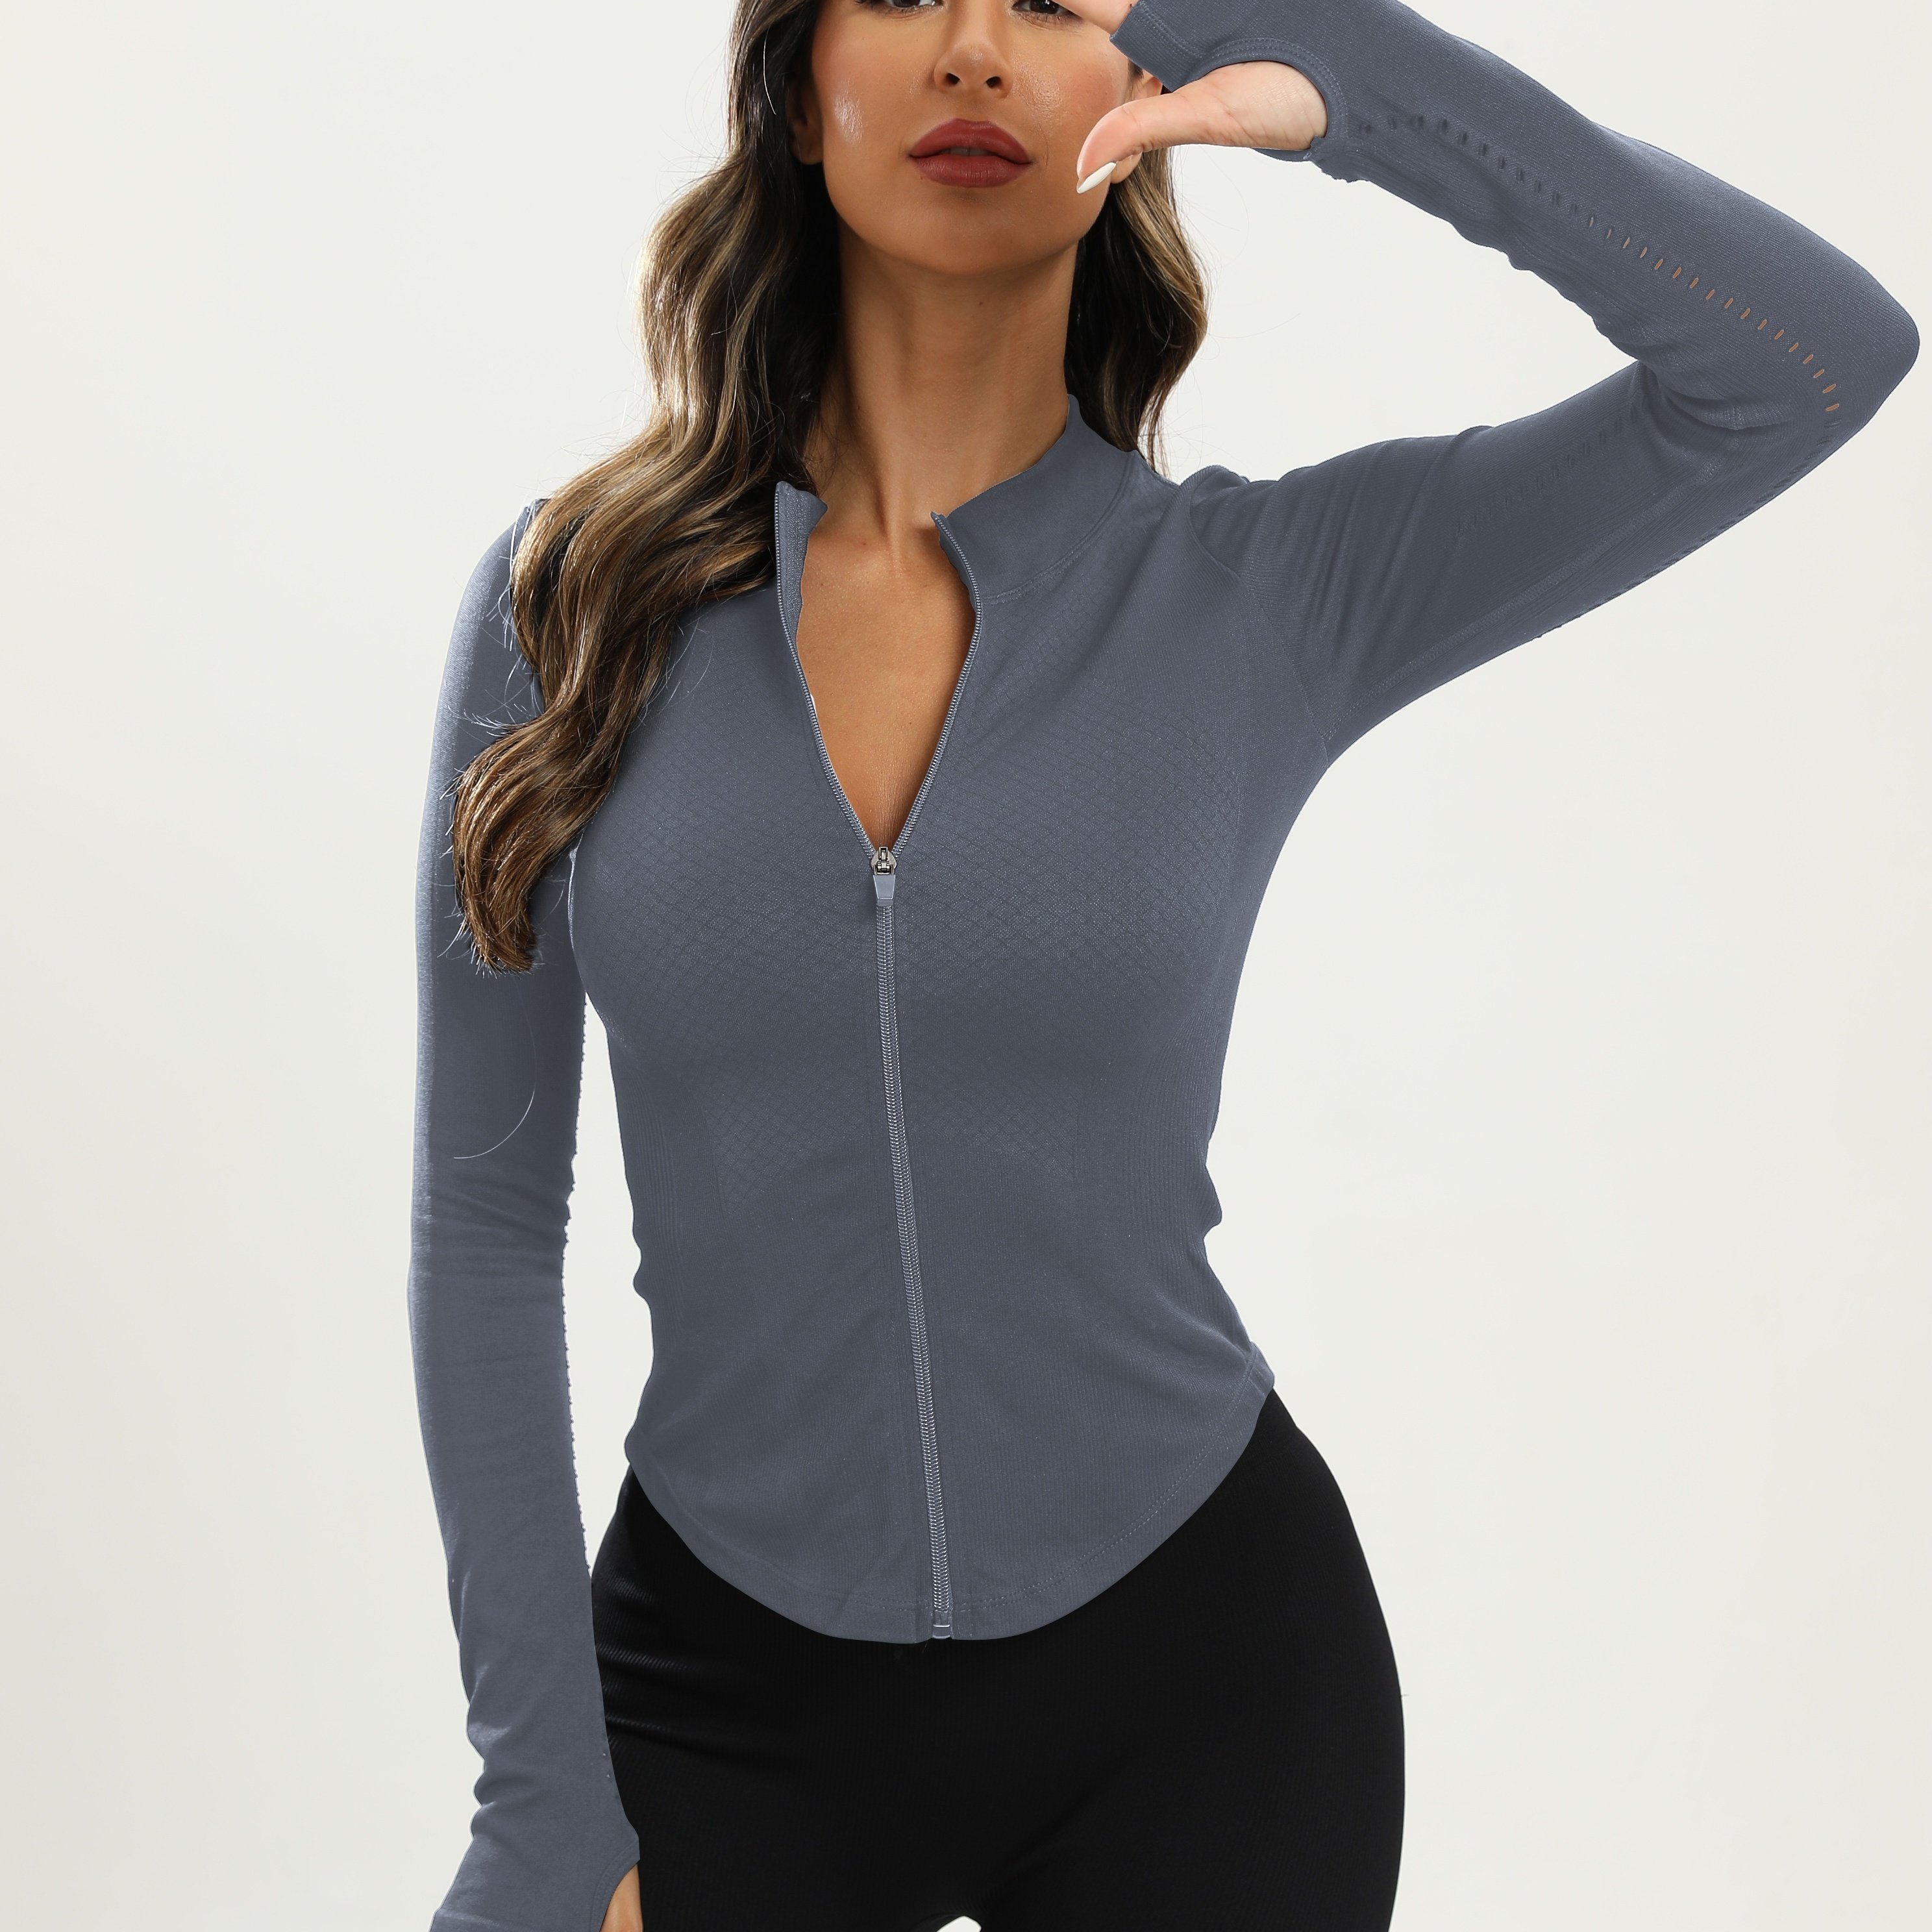 Tuff Veda Yoga Jackets on SALE 😍Funnel neck, long sleeves with thumbh